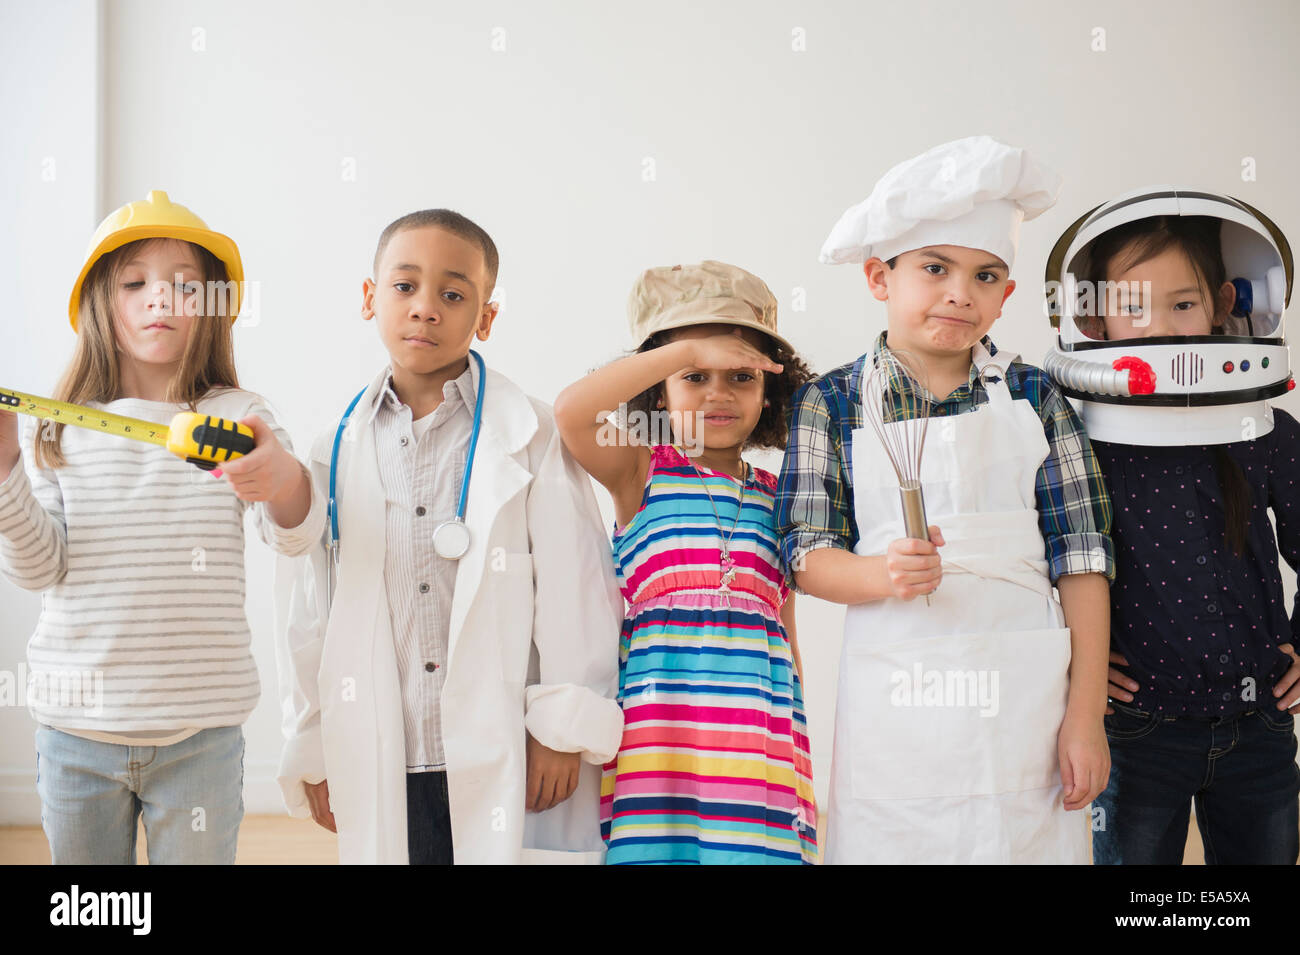 Children playing dress up together Stock Photo